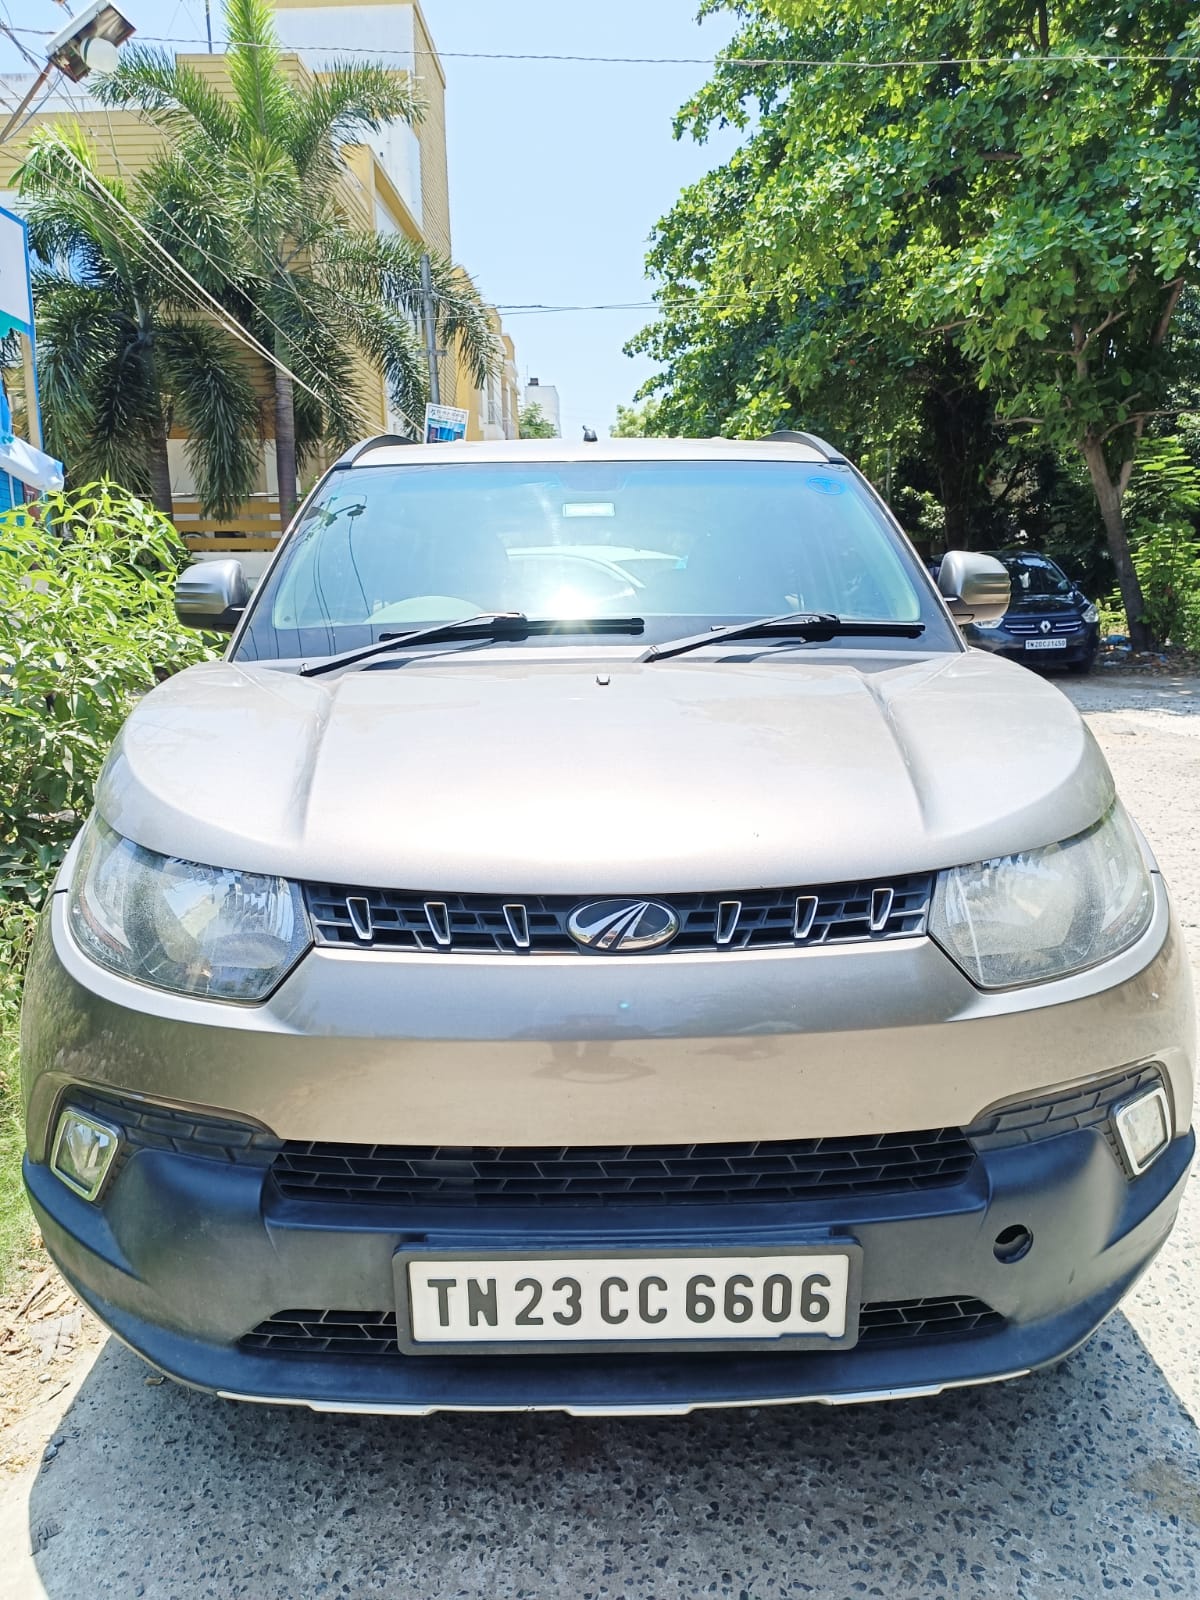 4290-for-sale-Mahindra-KUV-100-Diesel-First-Owner-2016-TN-registered-rs-375000